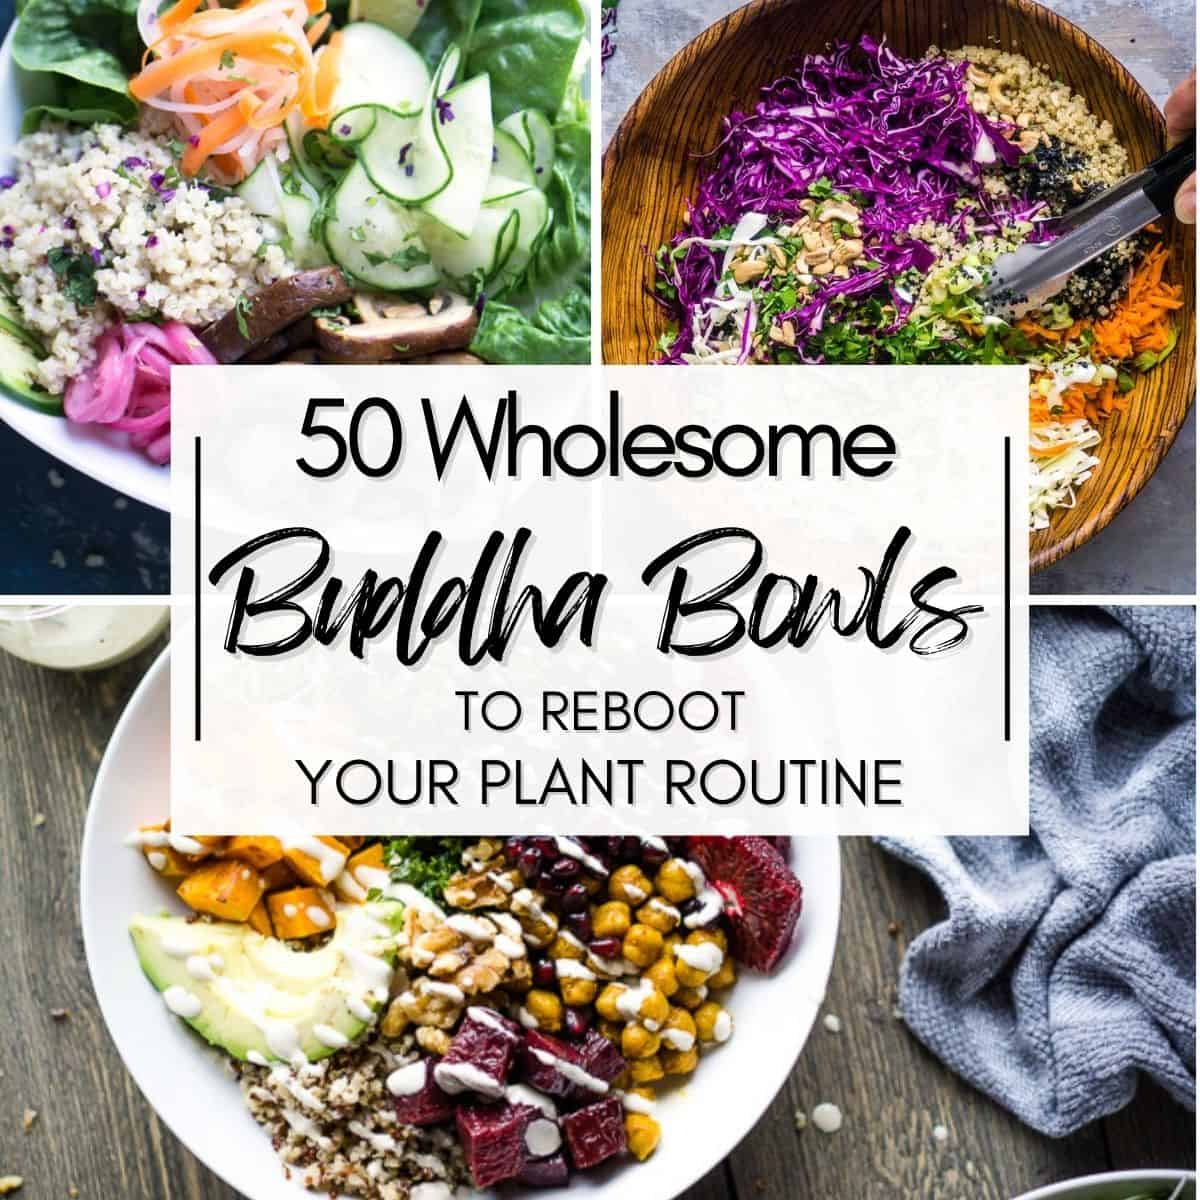 image collage of buddha bowls with center text "50 Wholesome Buddha Bowls to Reboot Your Plant Routine"